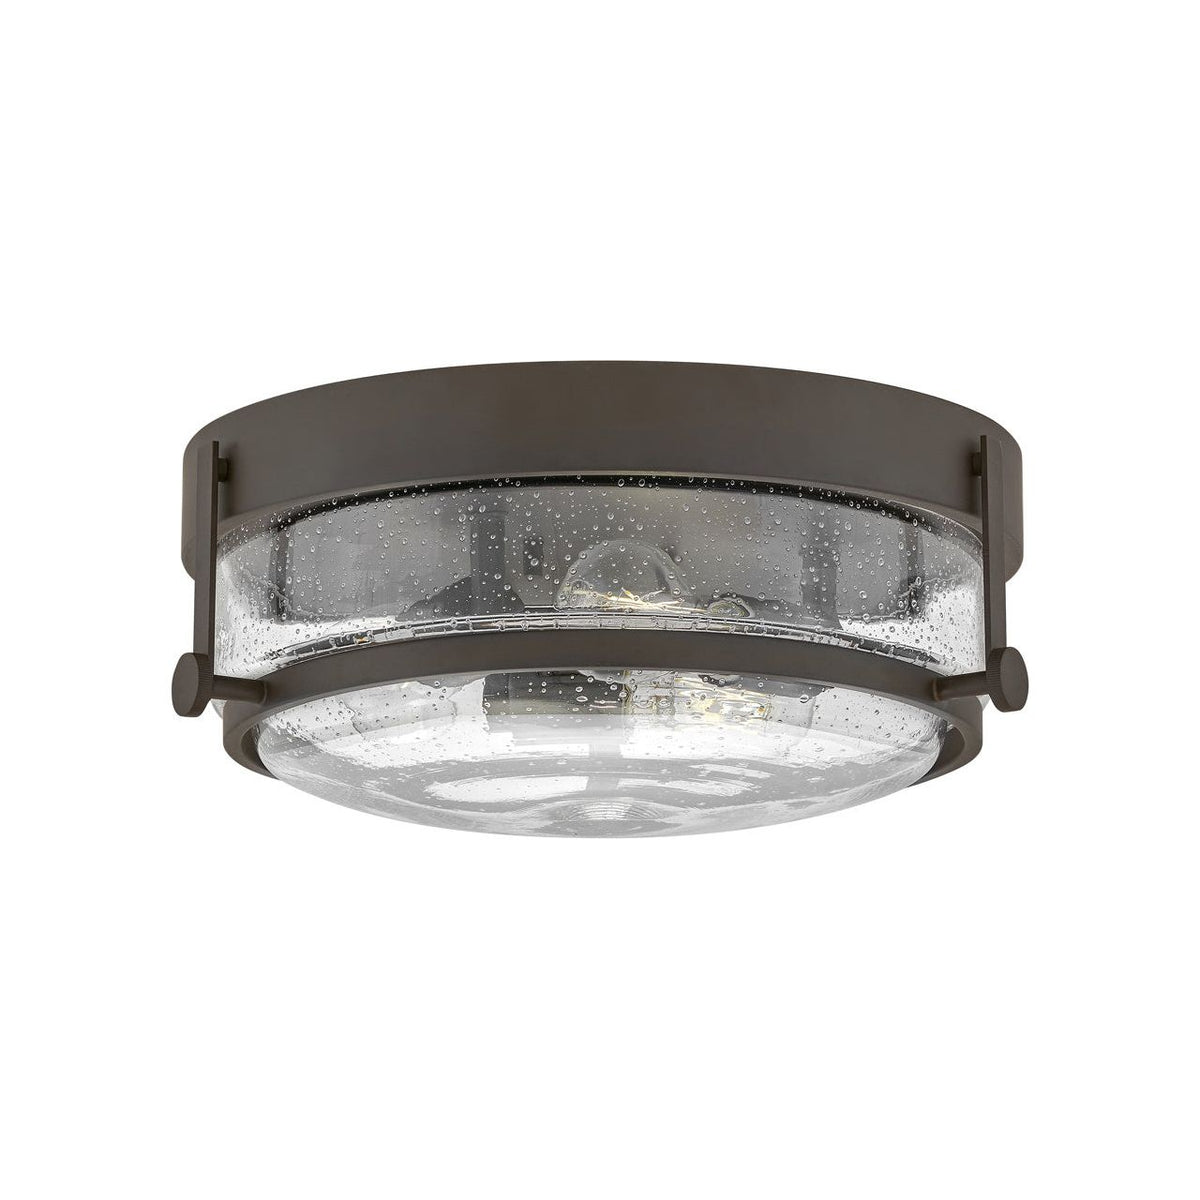 Hinkley Canada - 3640OZ-CS - LED Flush Mount - Harper - Oil Rubbed Bronze with Clear Seedy glass